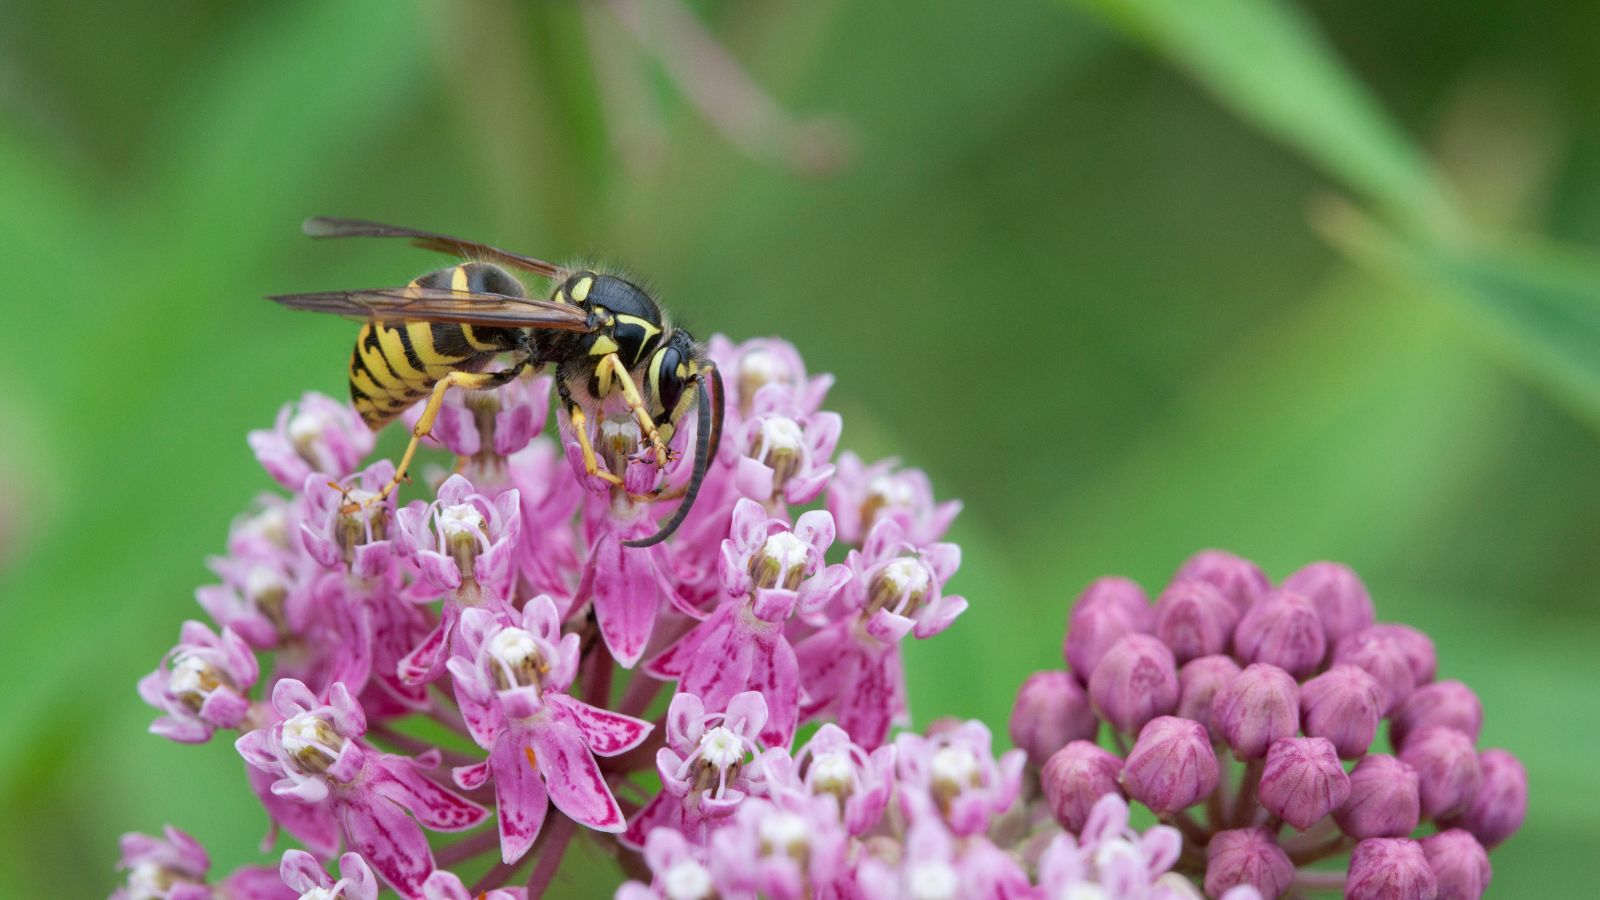 How to get rid of yellowjackets: from your yard and home